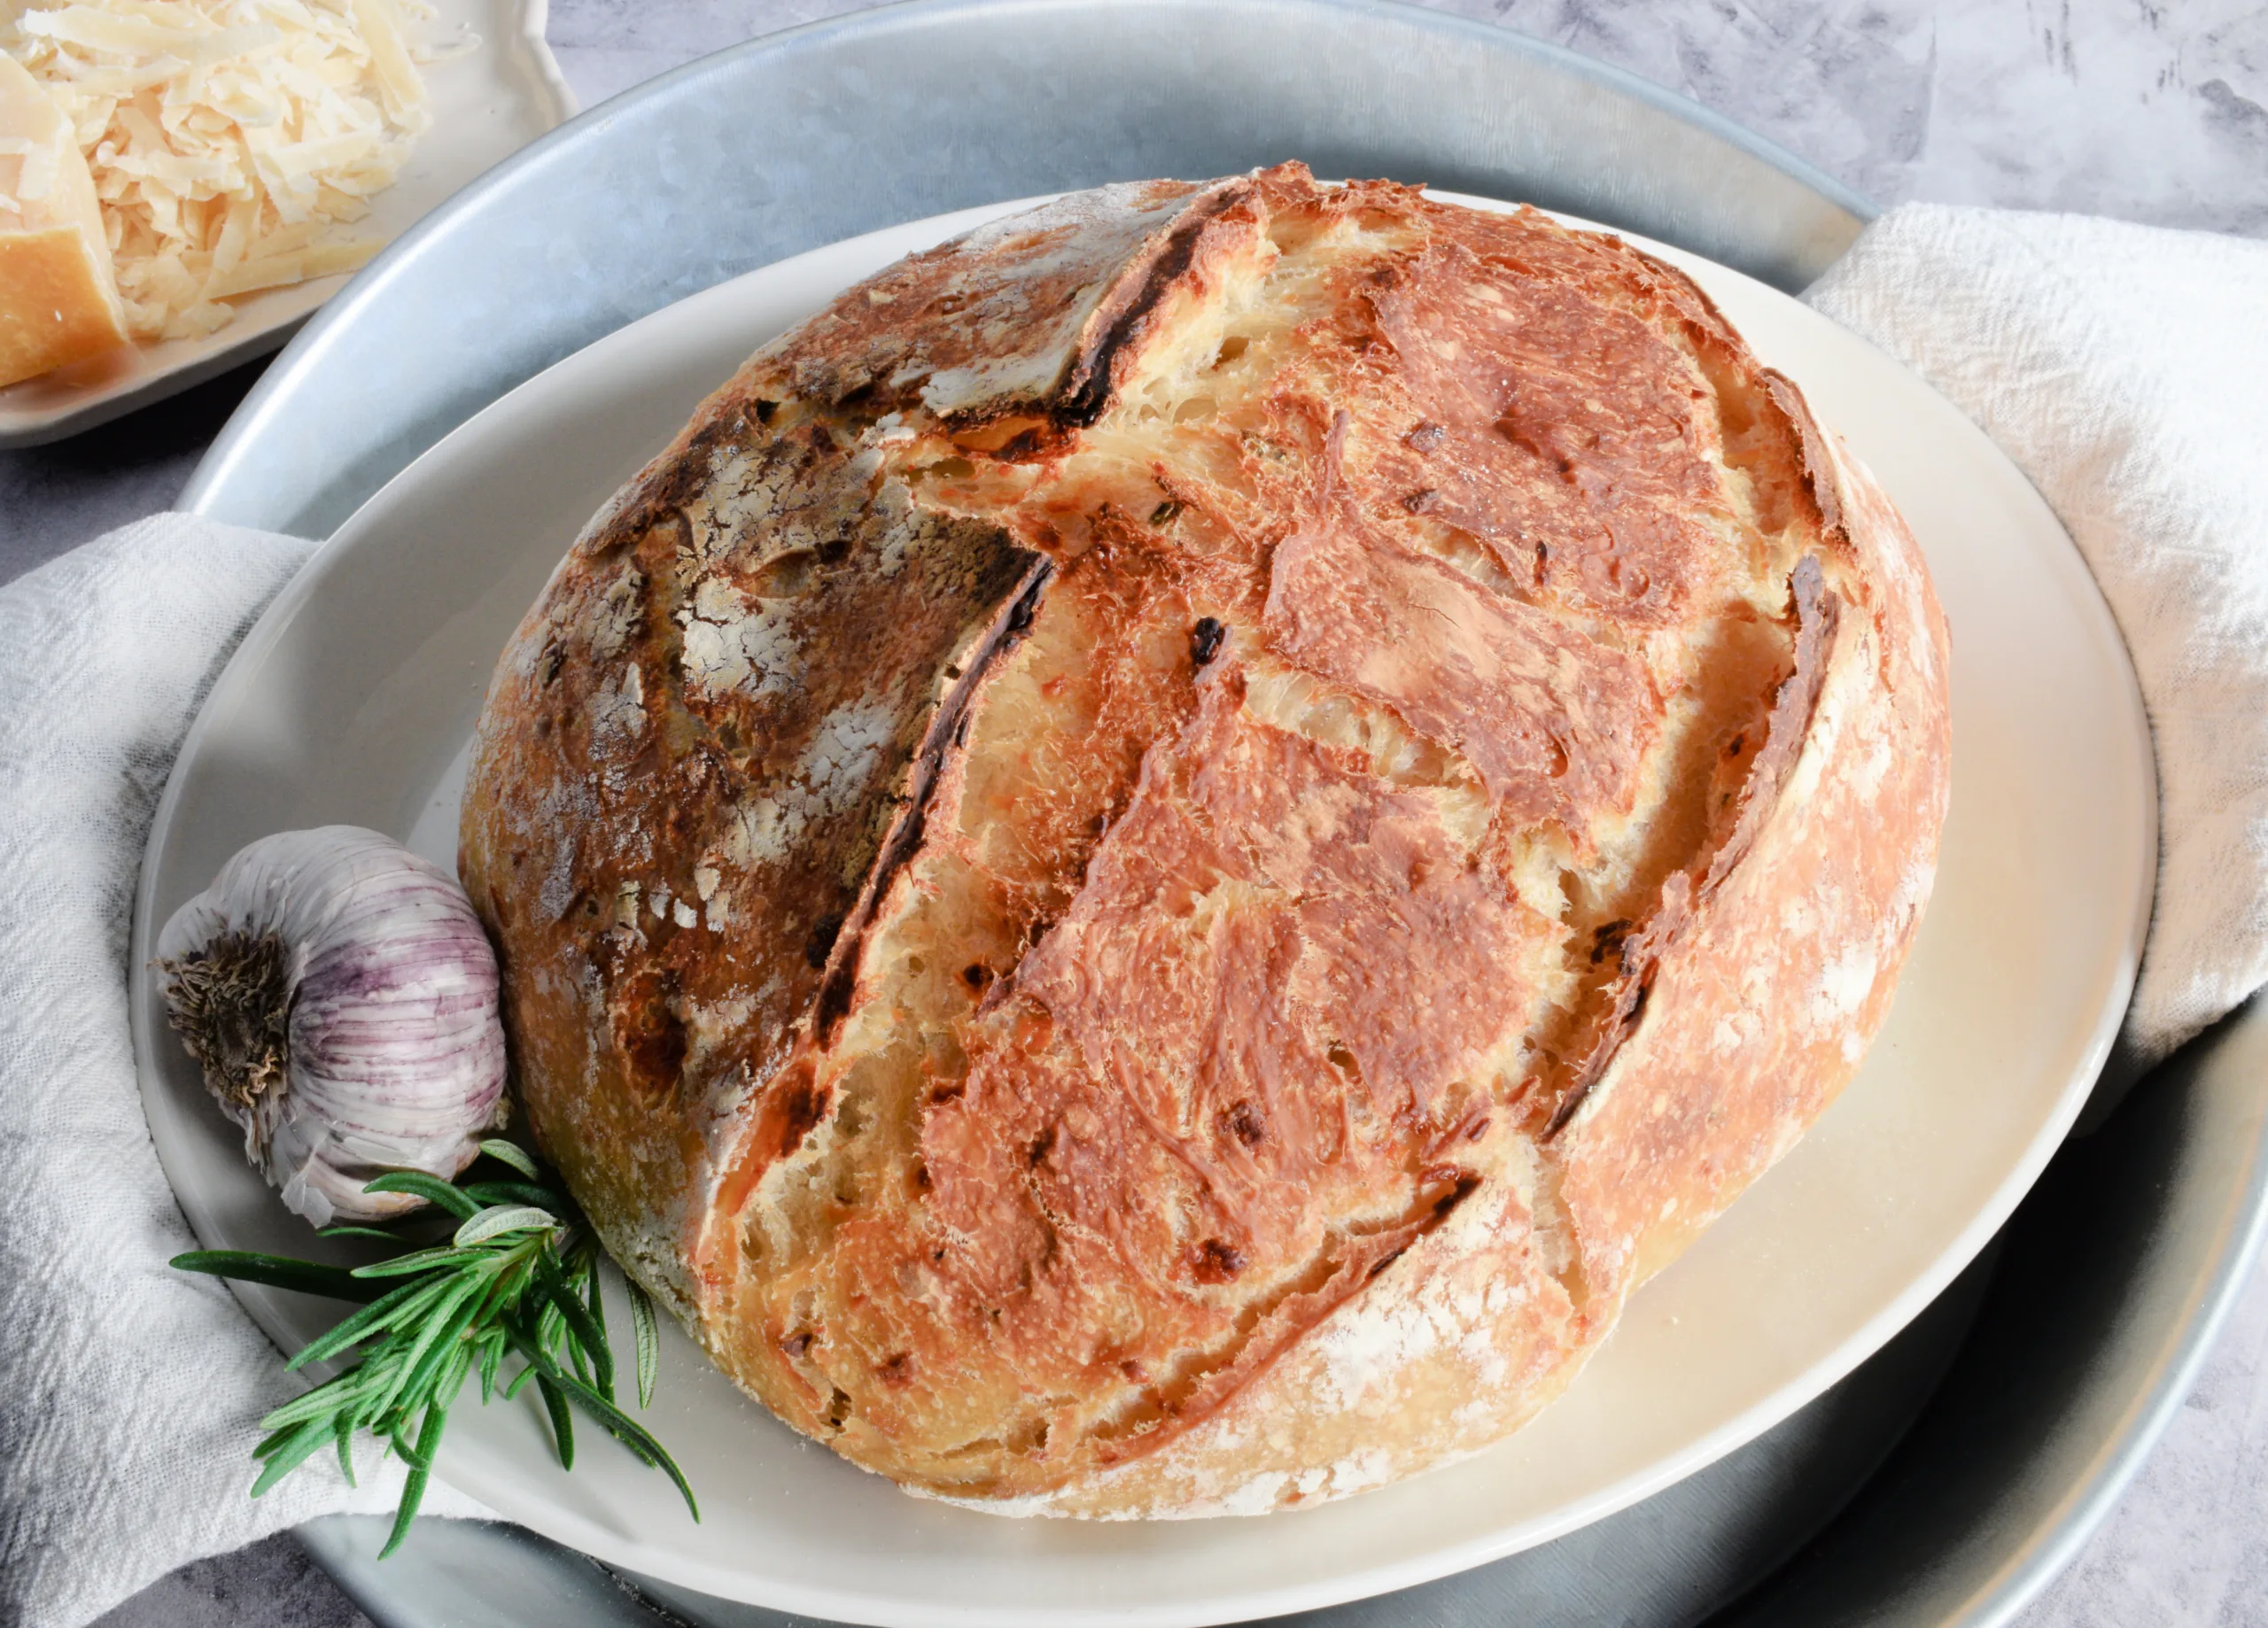 Freshly baked Rosemary Garlic Sourdough Bread with Parmesan Cheese.